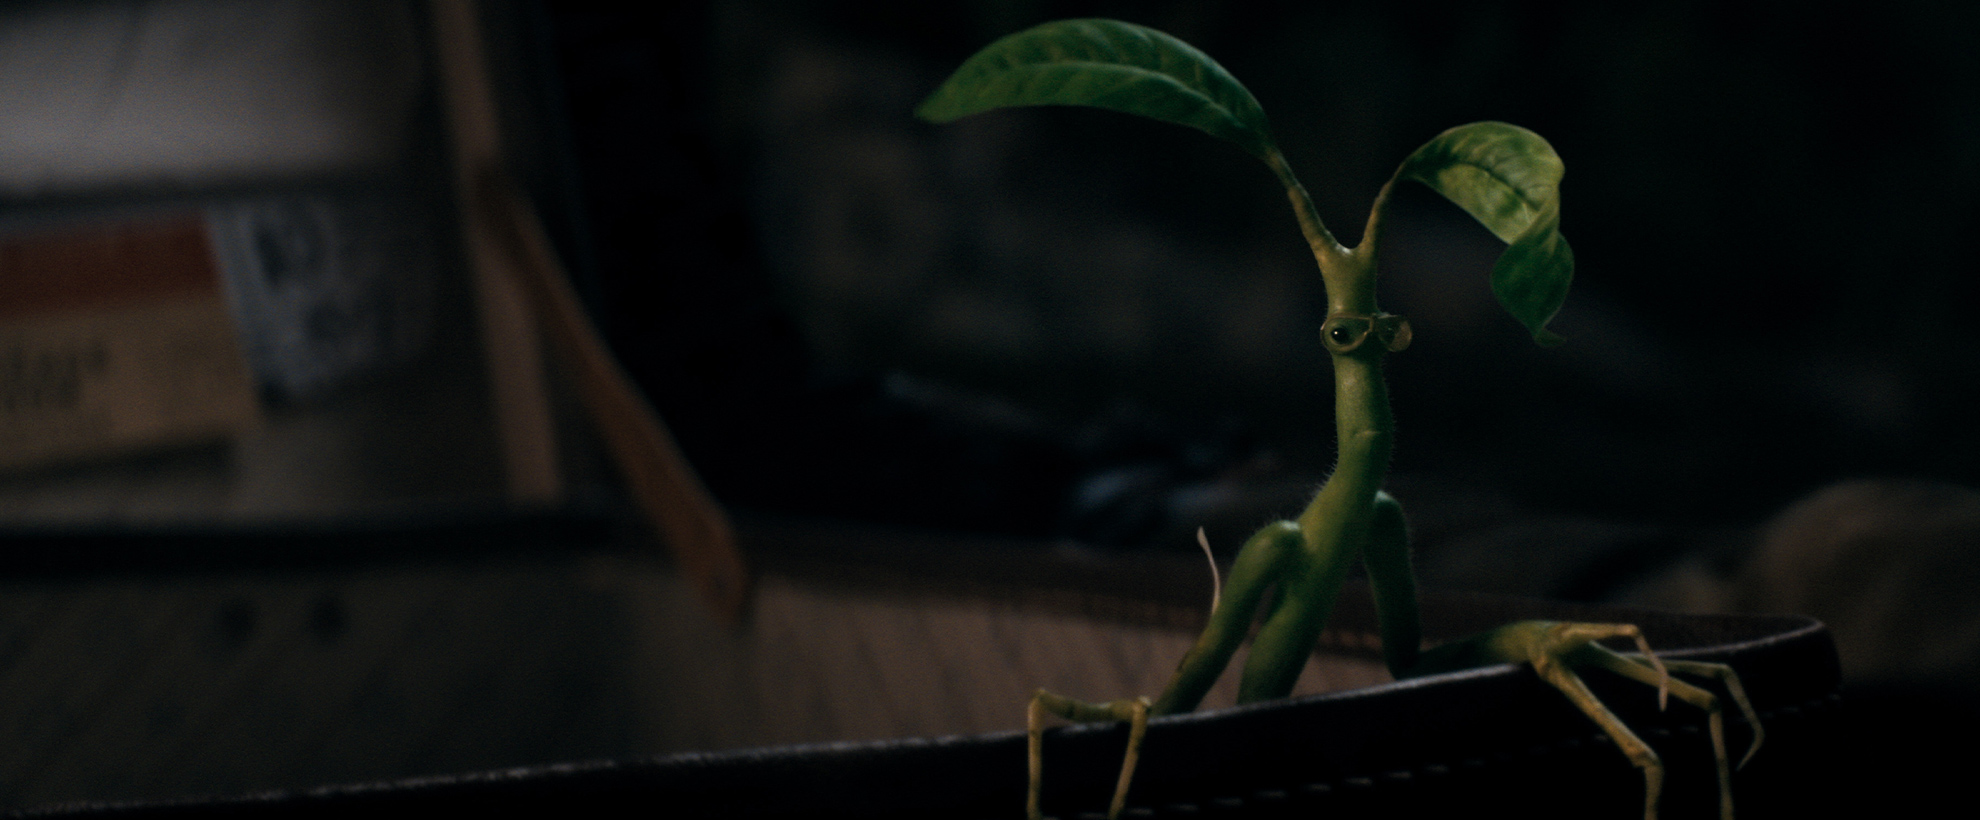 Pickett the bowtruckle sits in Newt's briefcase, with some flying goggles on